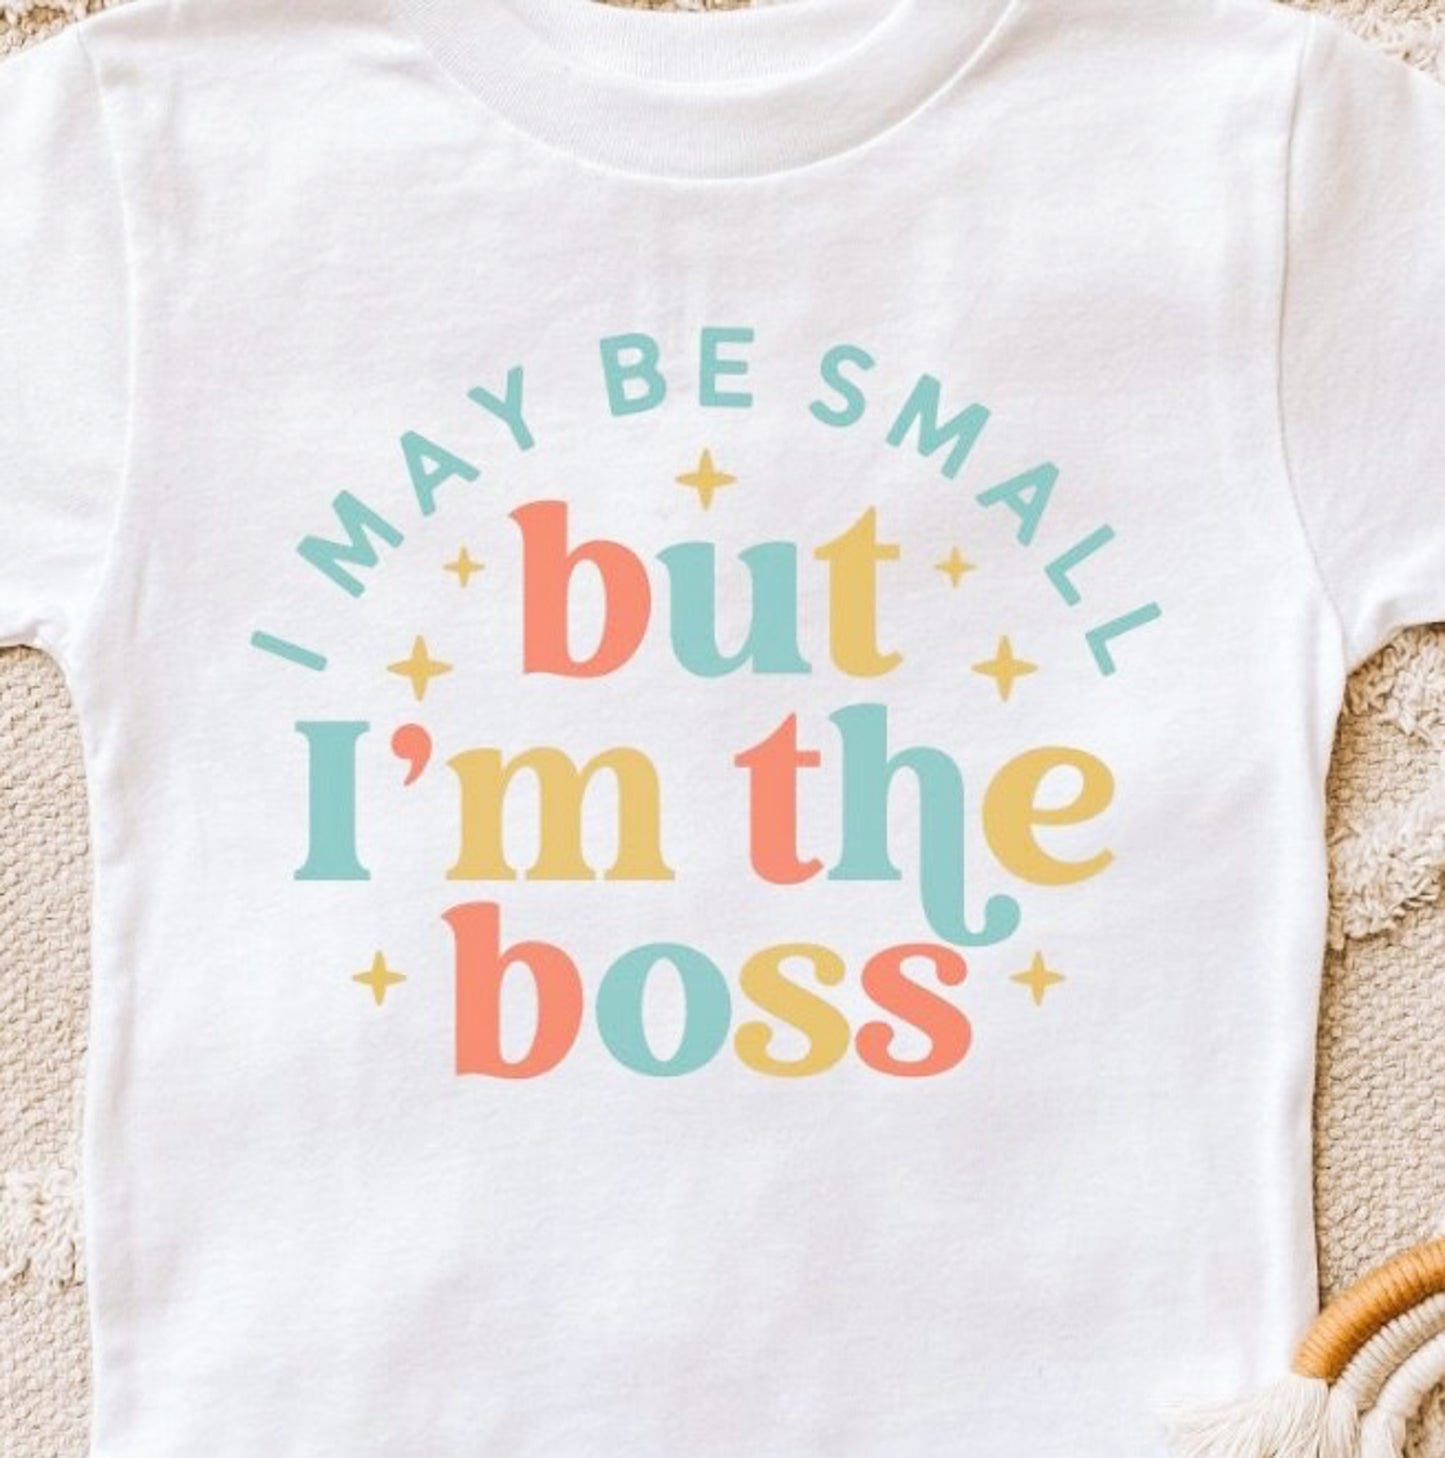 I May Be Small But I'm The Boss Tee